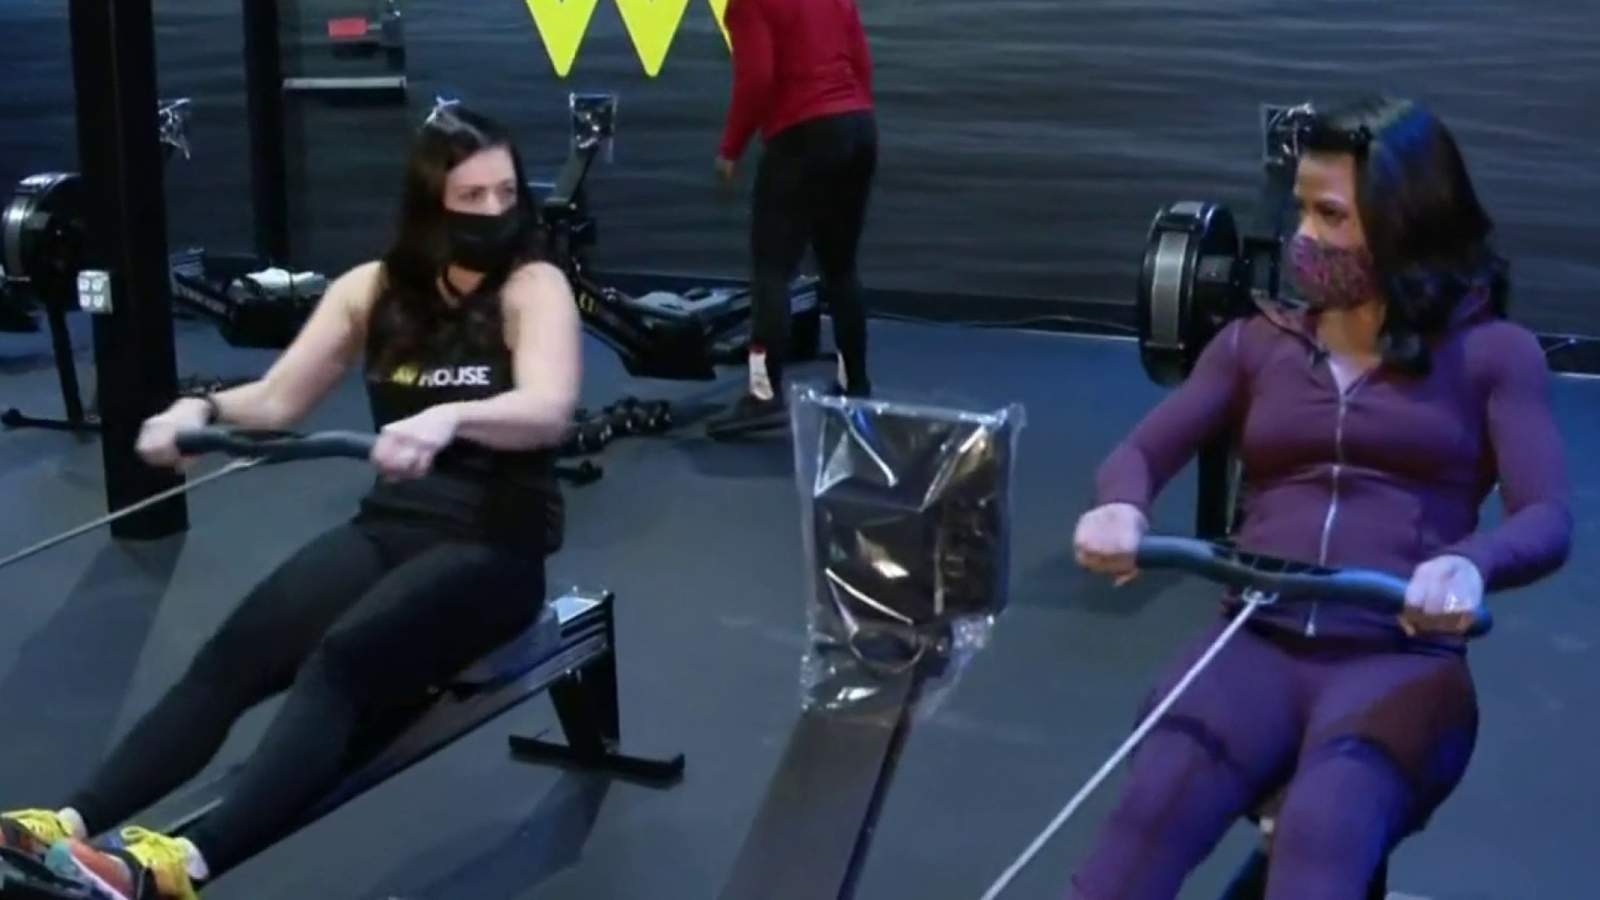 Fitness Friday: Rowing boot camp